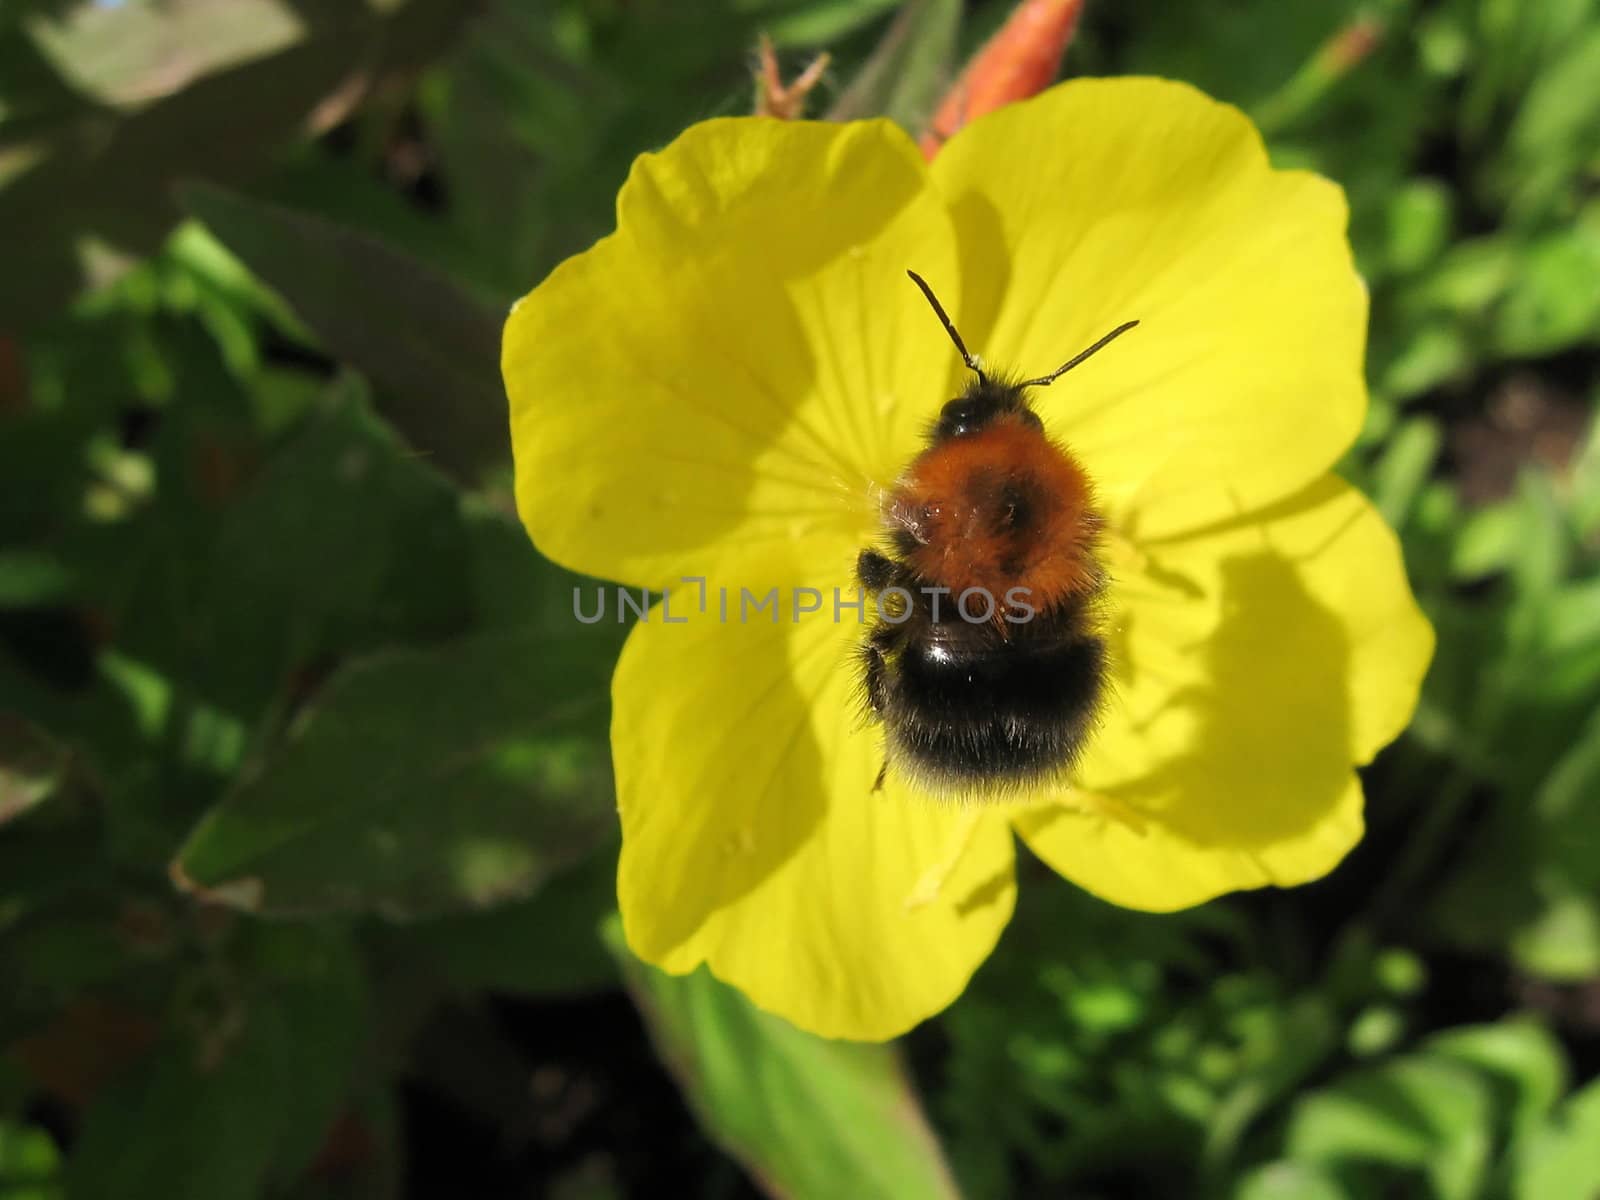 Cute bumble-bee sits on the yellow flower